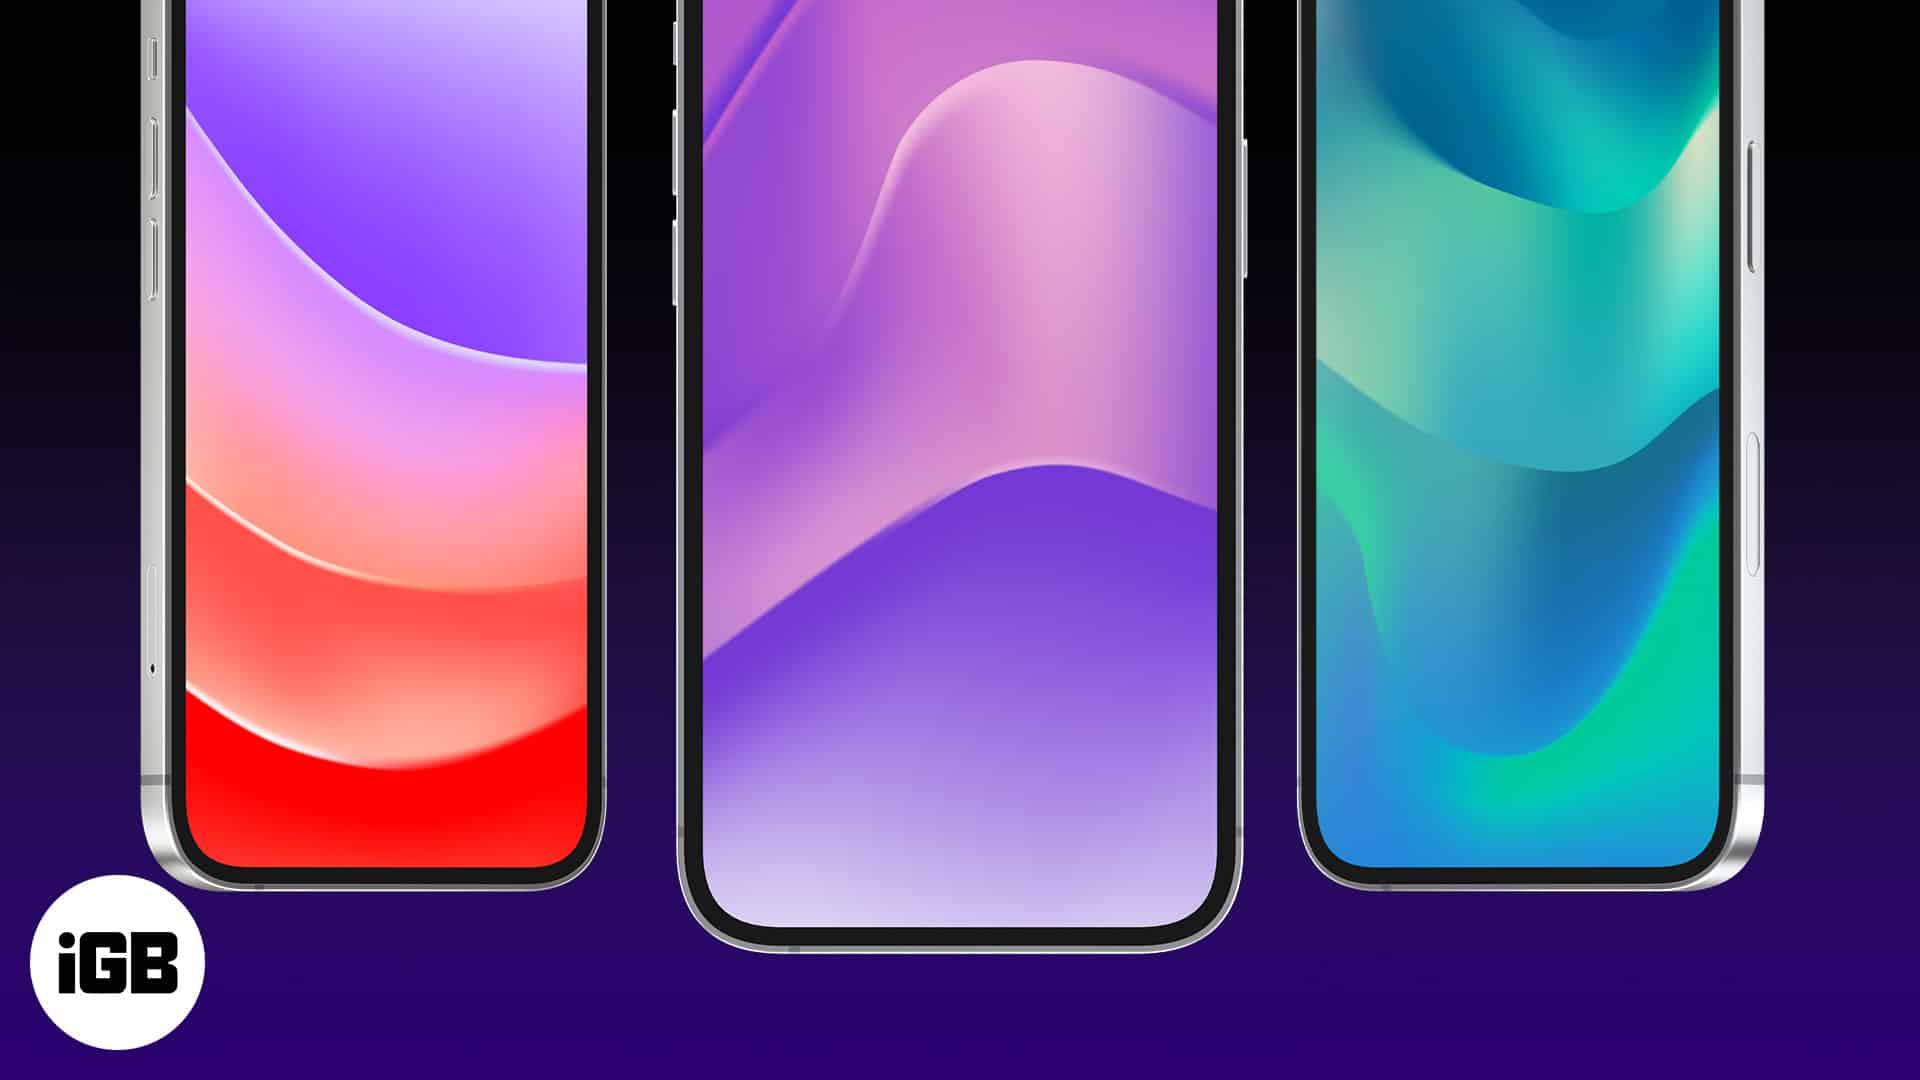 10 Gorgeous gradient wallpapers for iPhone in 2023 - iGeeksBlog